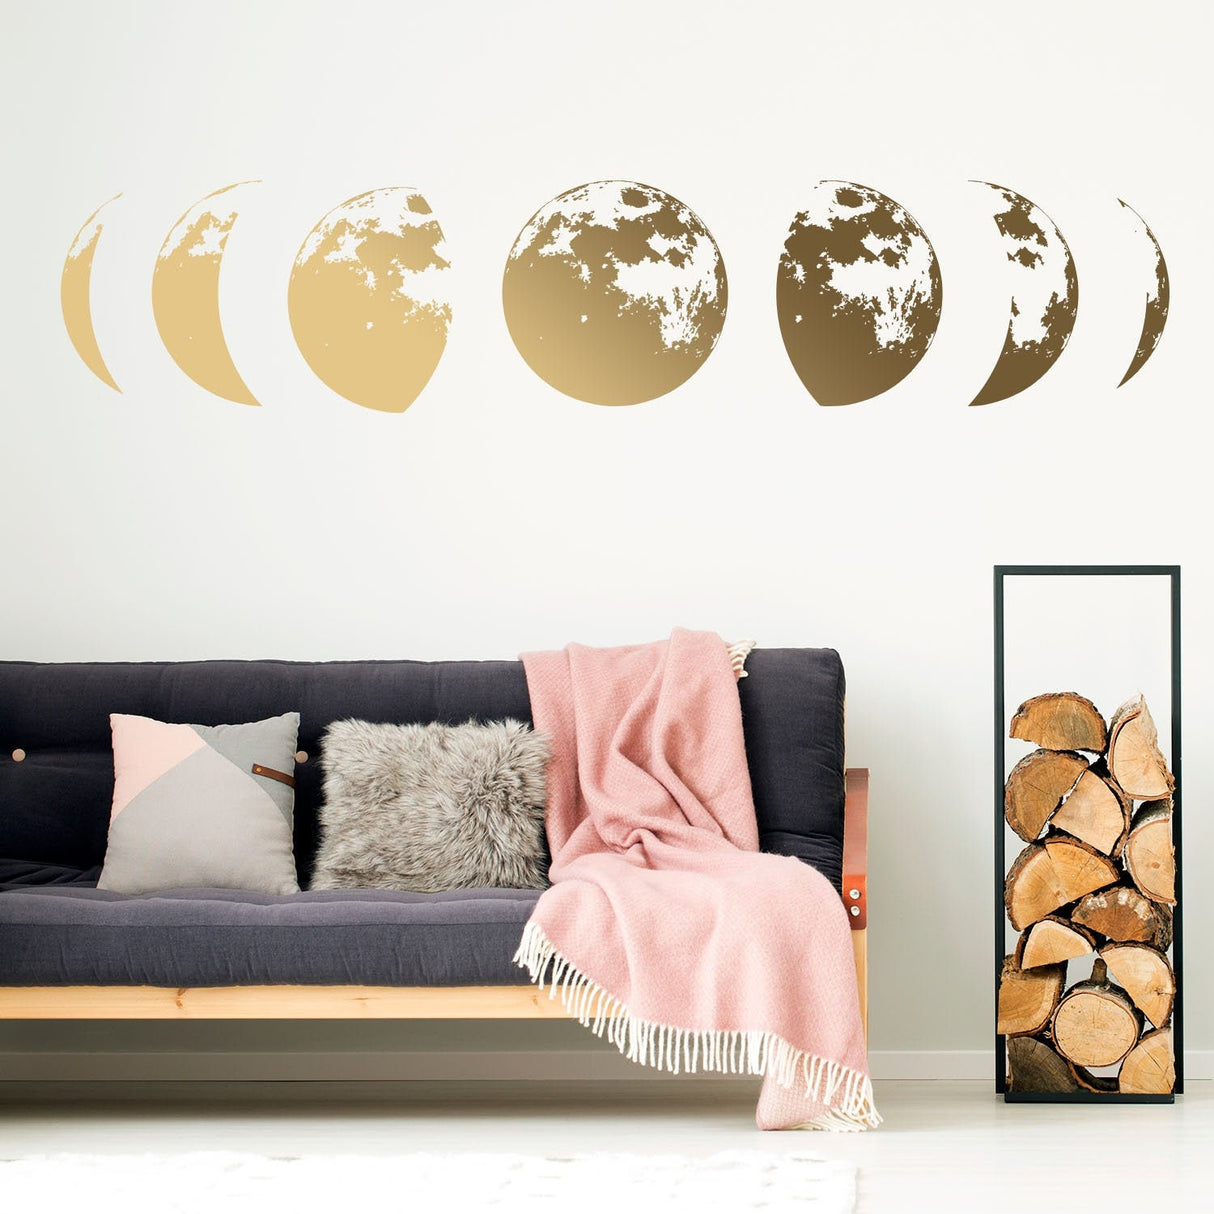 Moon Phases Wall Decor Decal - Gold Home Art Living Room Bedroom Sticker Decoration